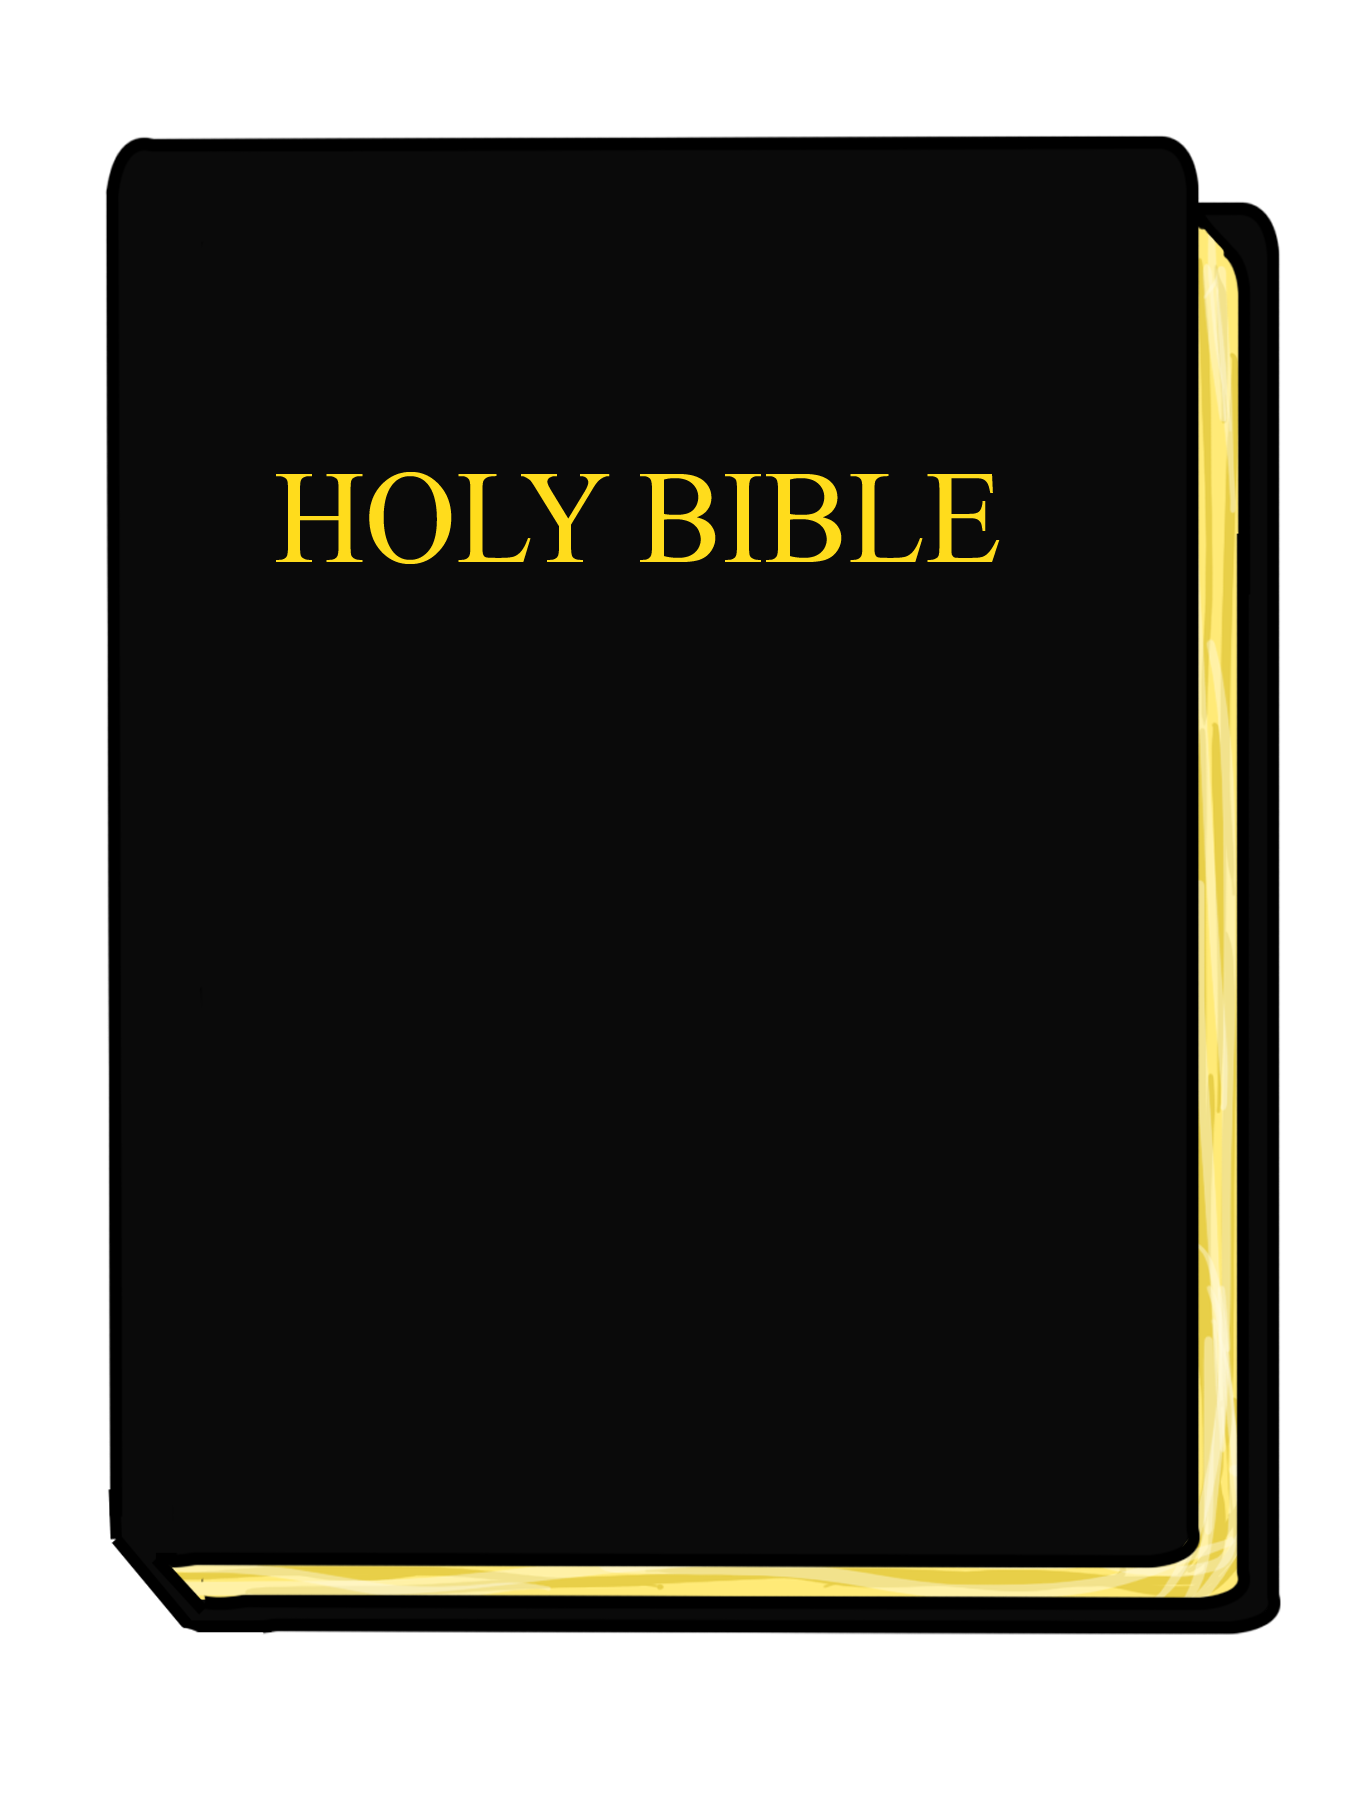 Clipart shield public domain. Free to use bible